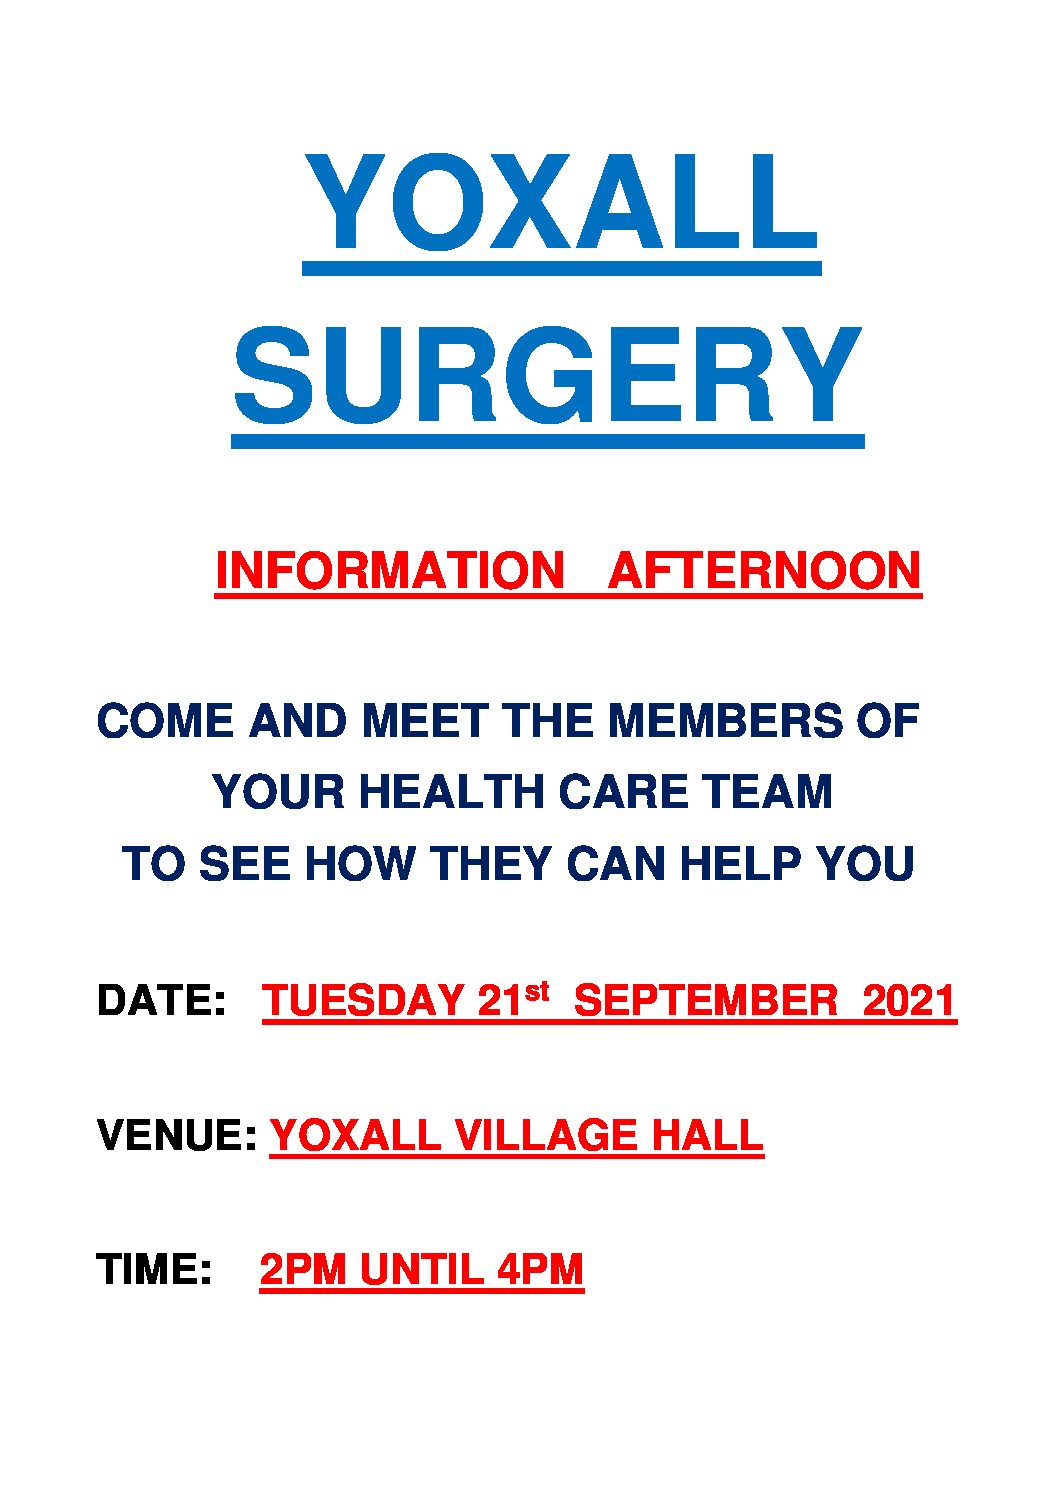 Meet the member’s of Your Health Care Team – Tuesday 21st September